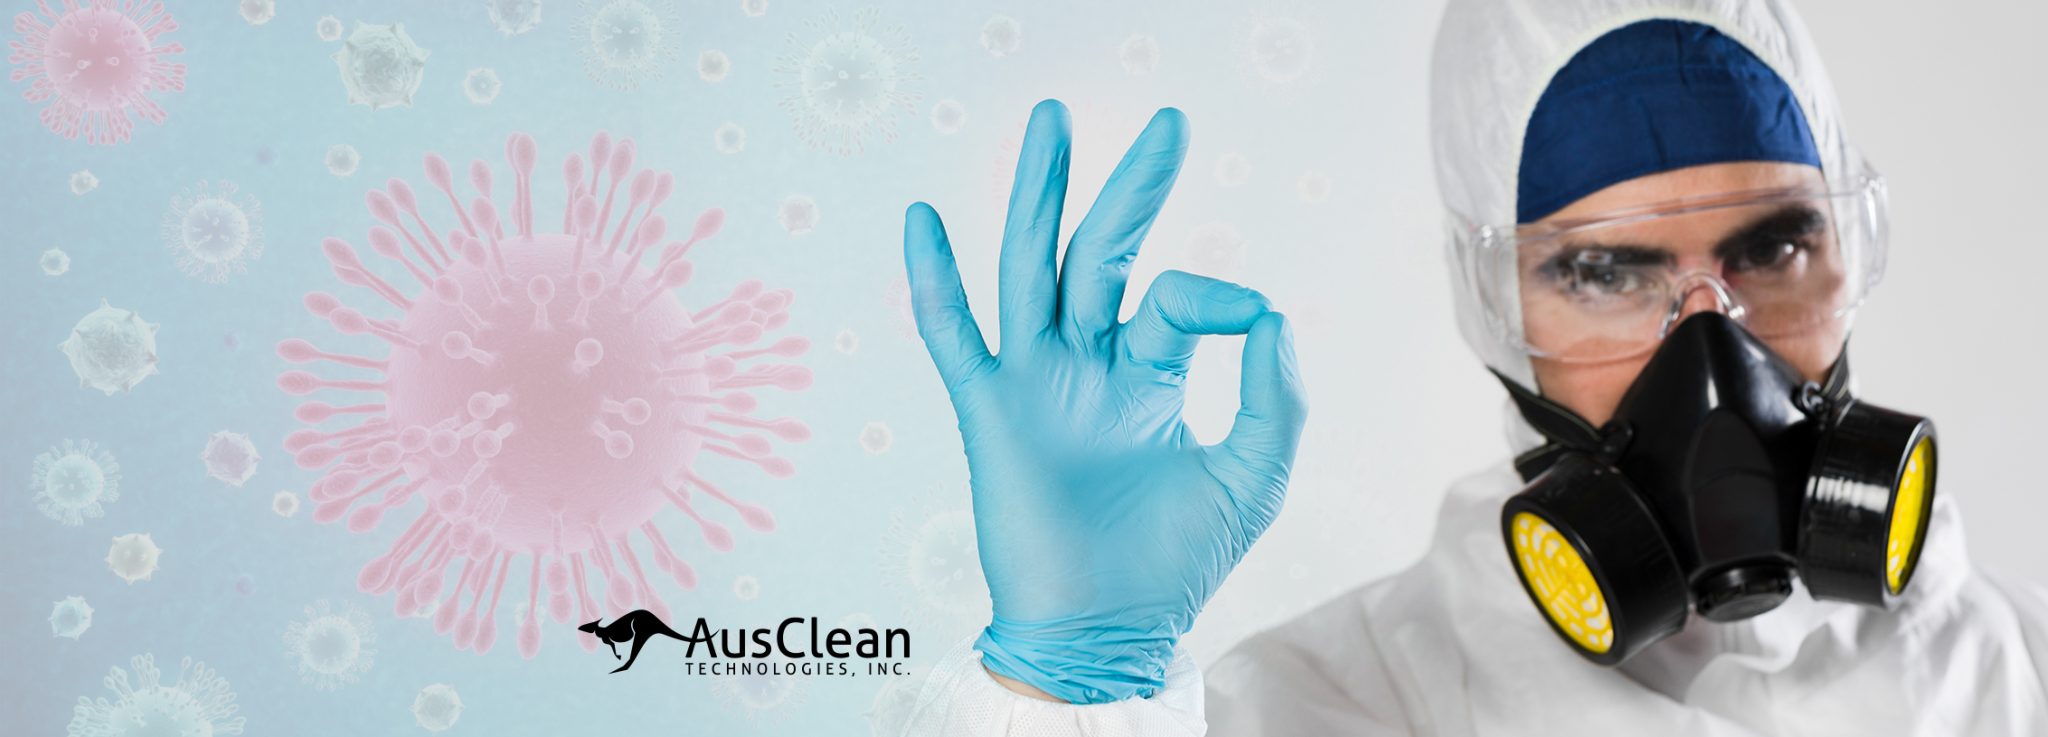 AusClean - Your Corona Virus Cleaning Solution